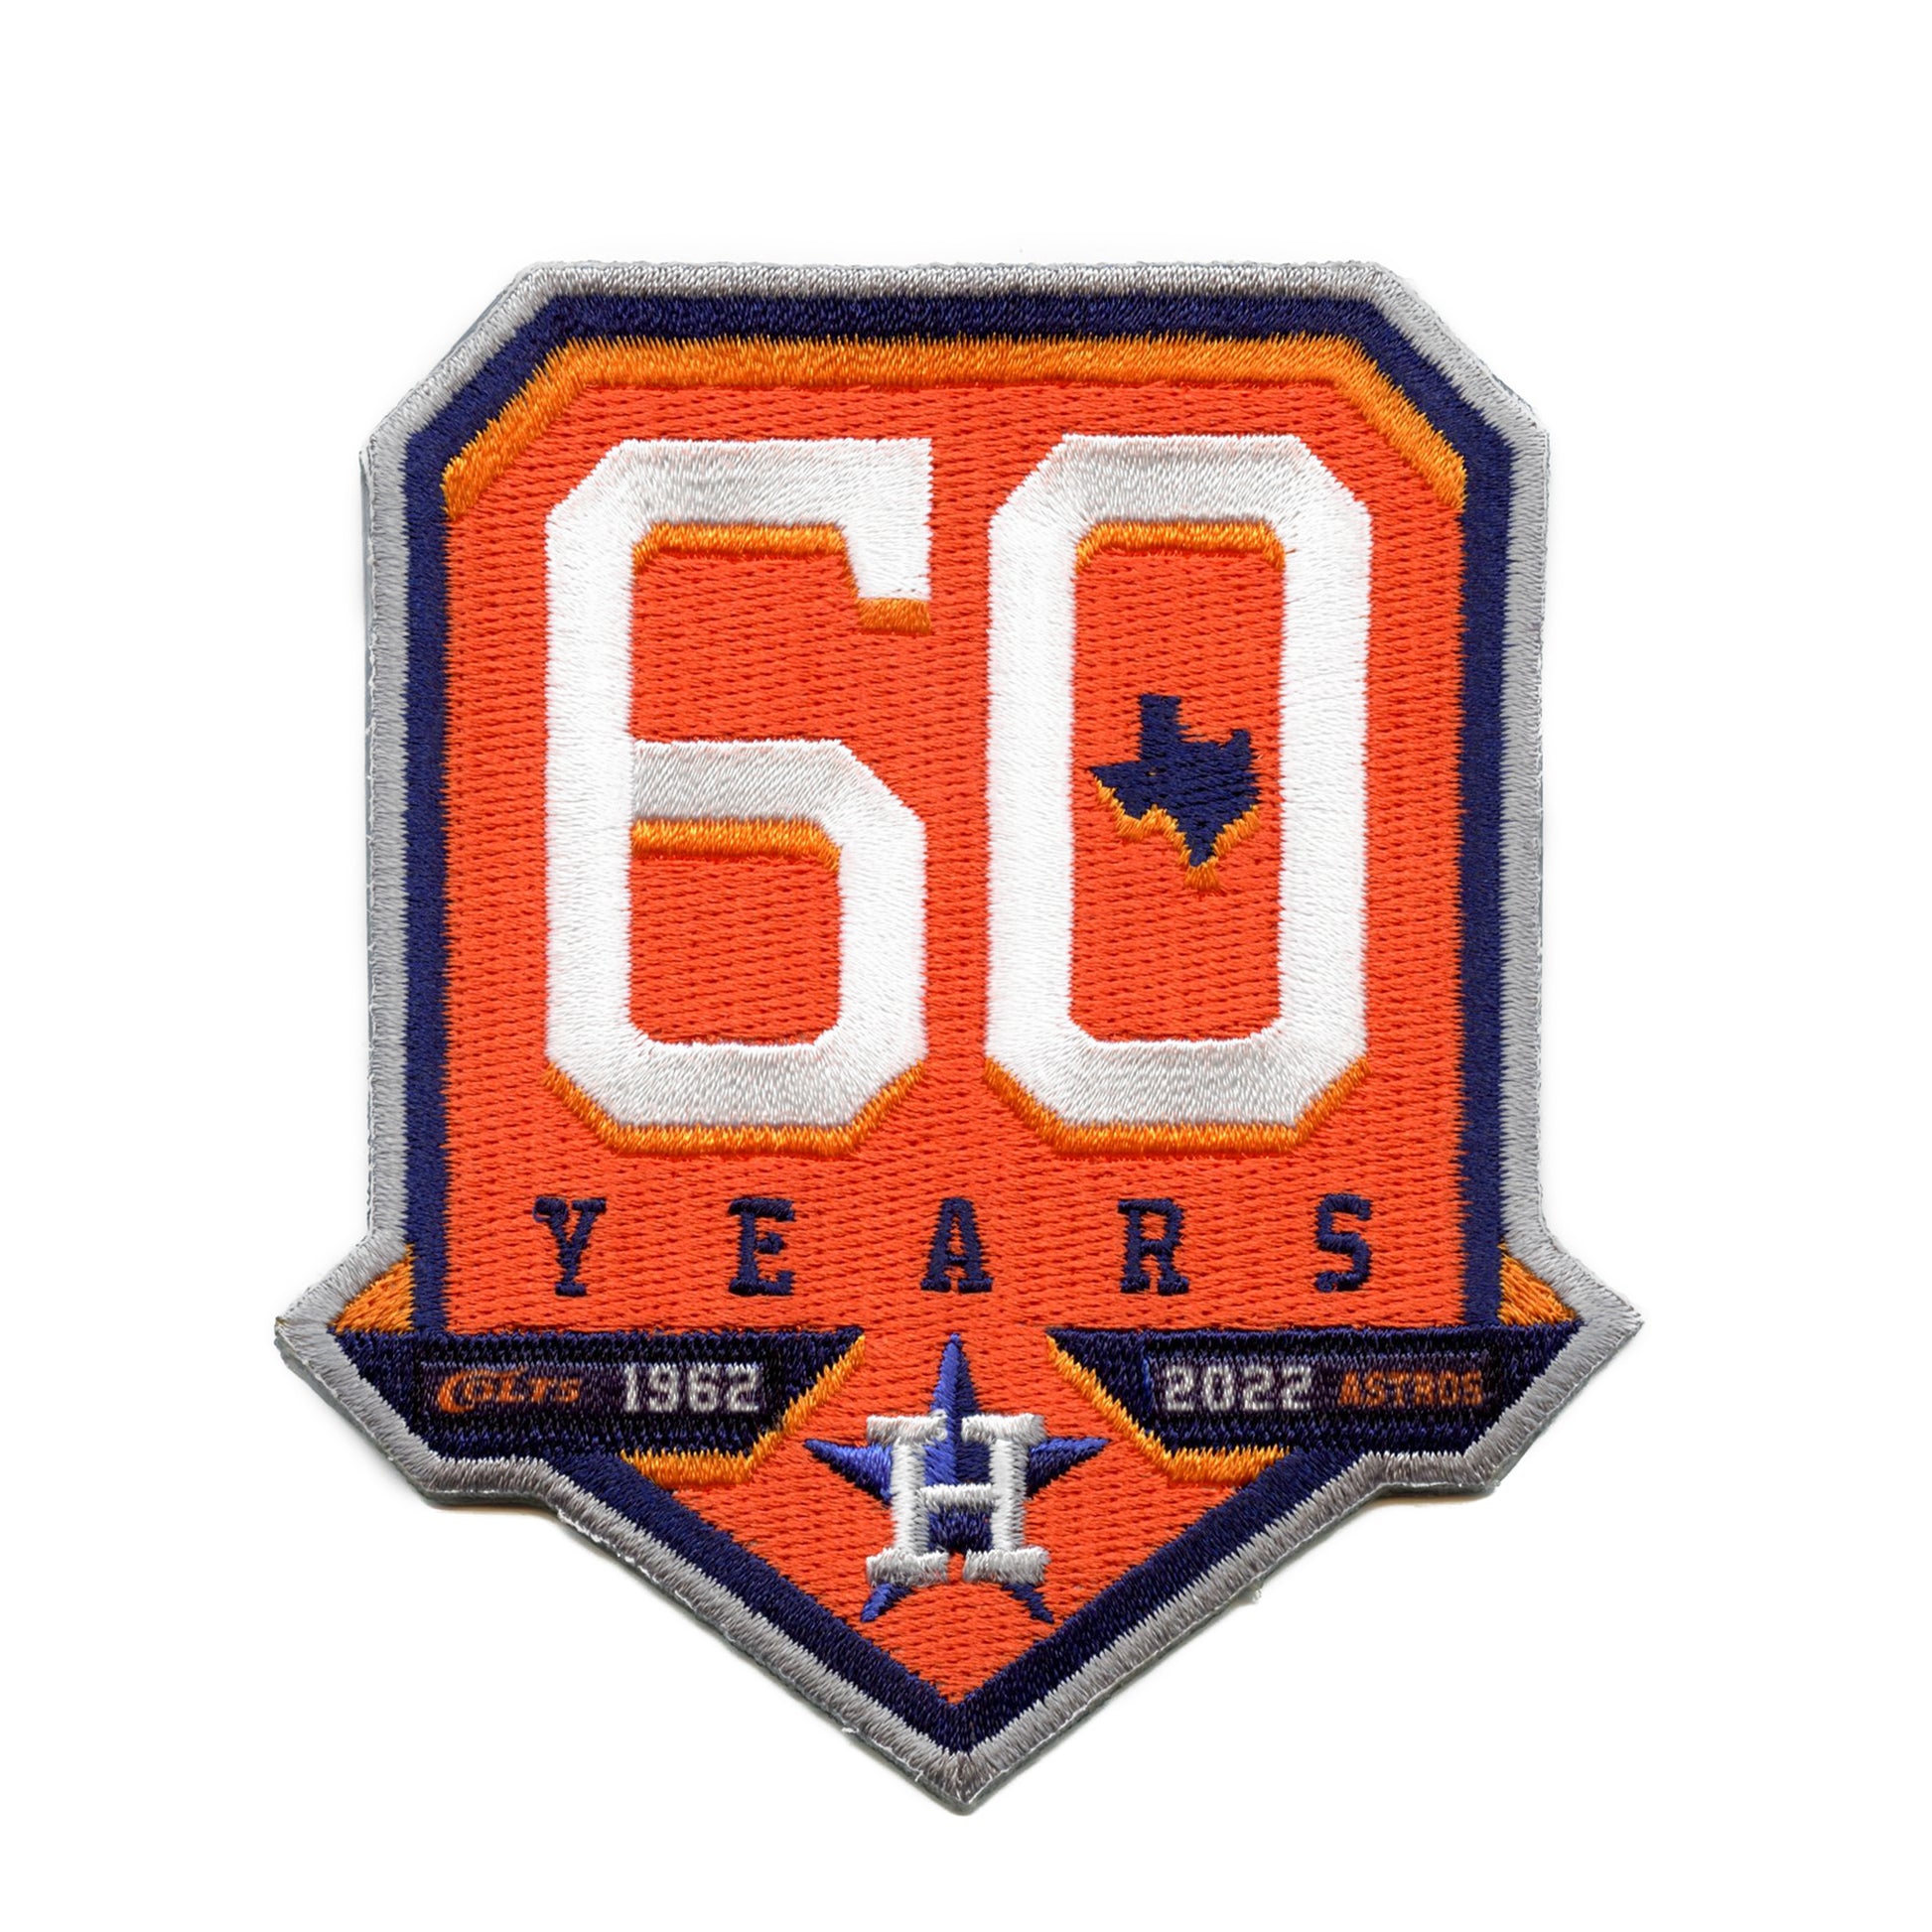 New 4 Houston Astros 2022 World Series Champions Iron on Patch Free Ship